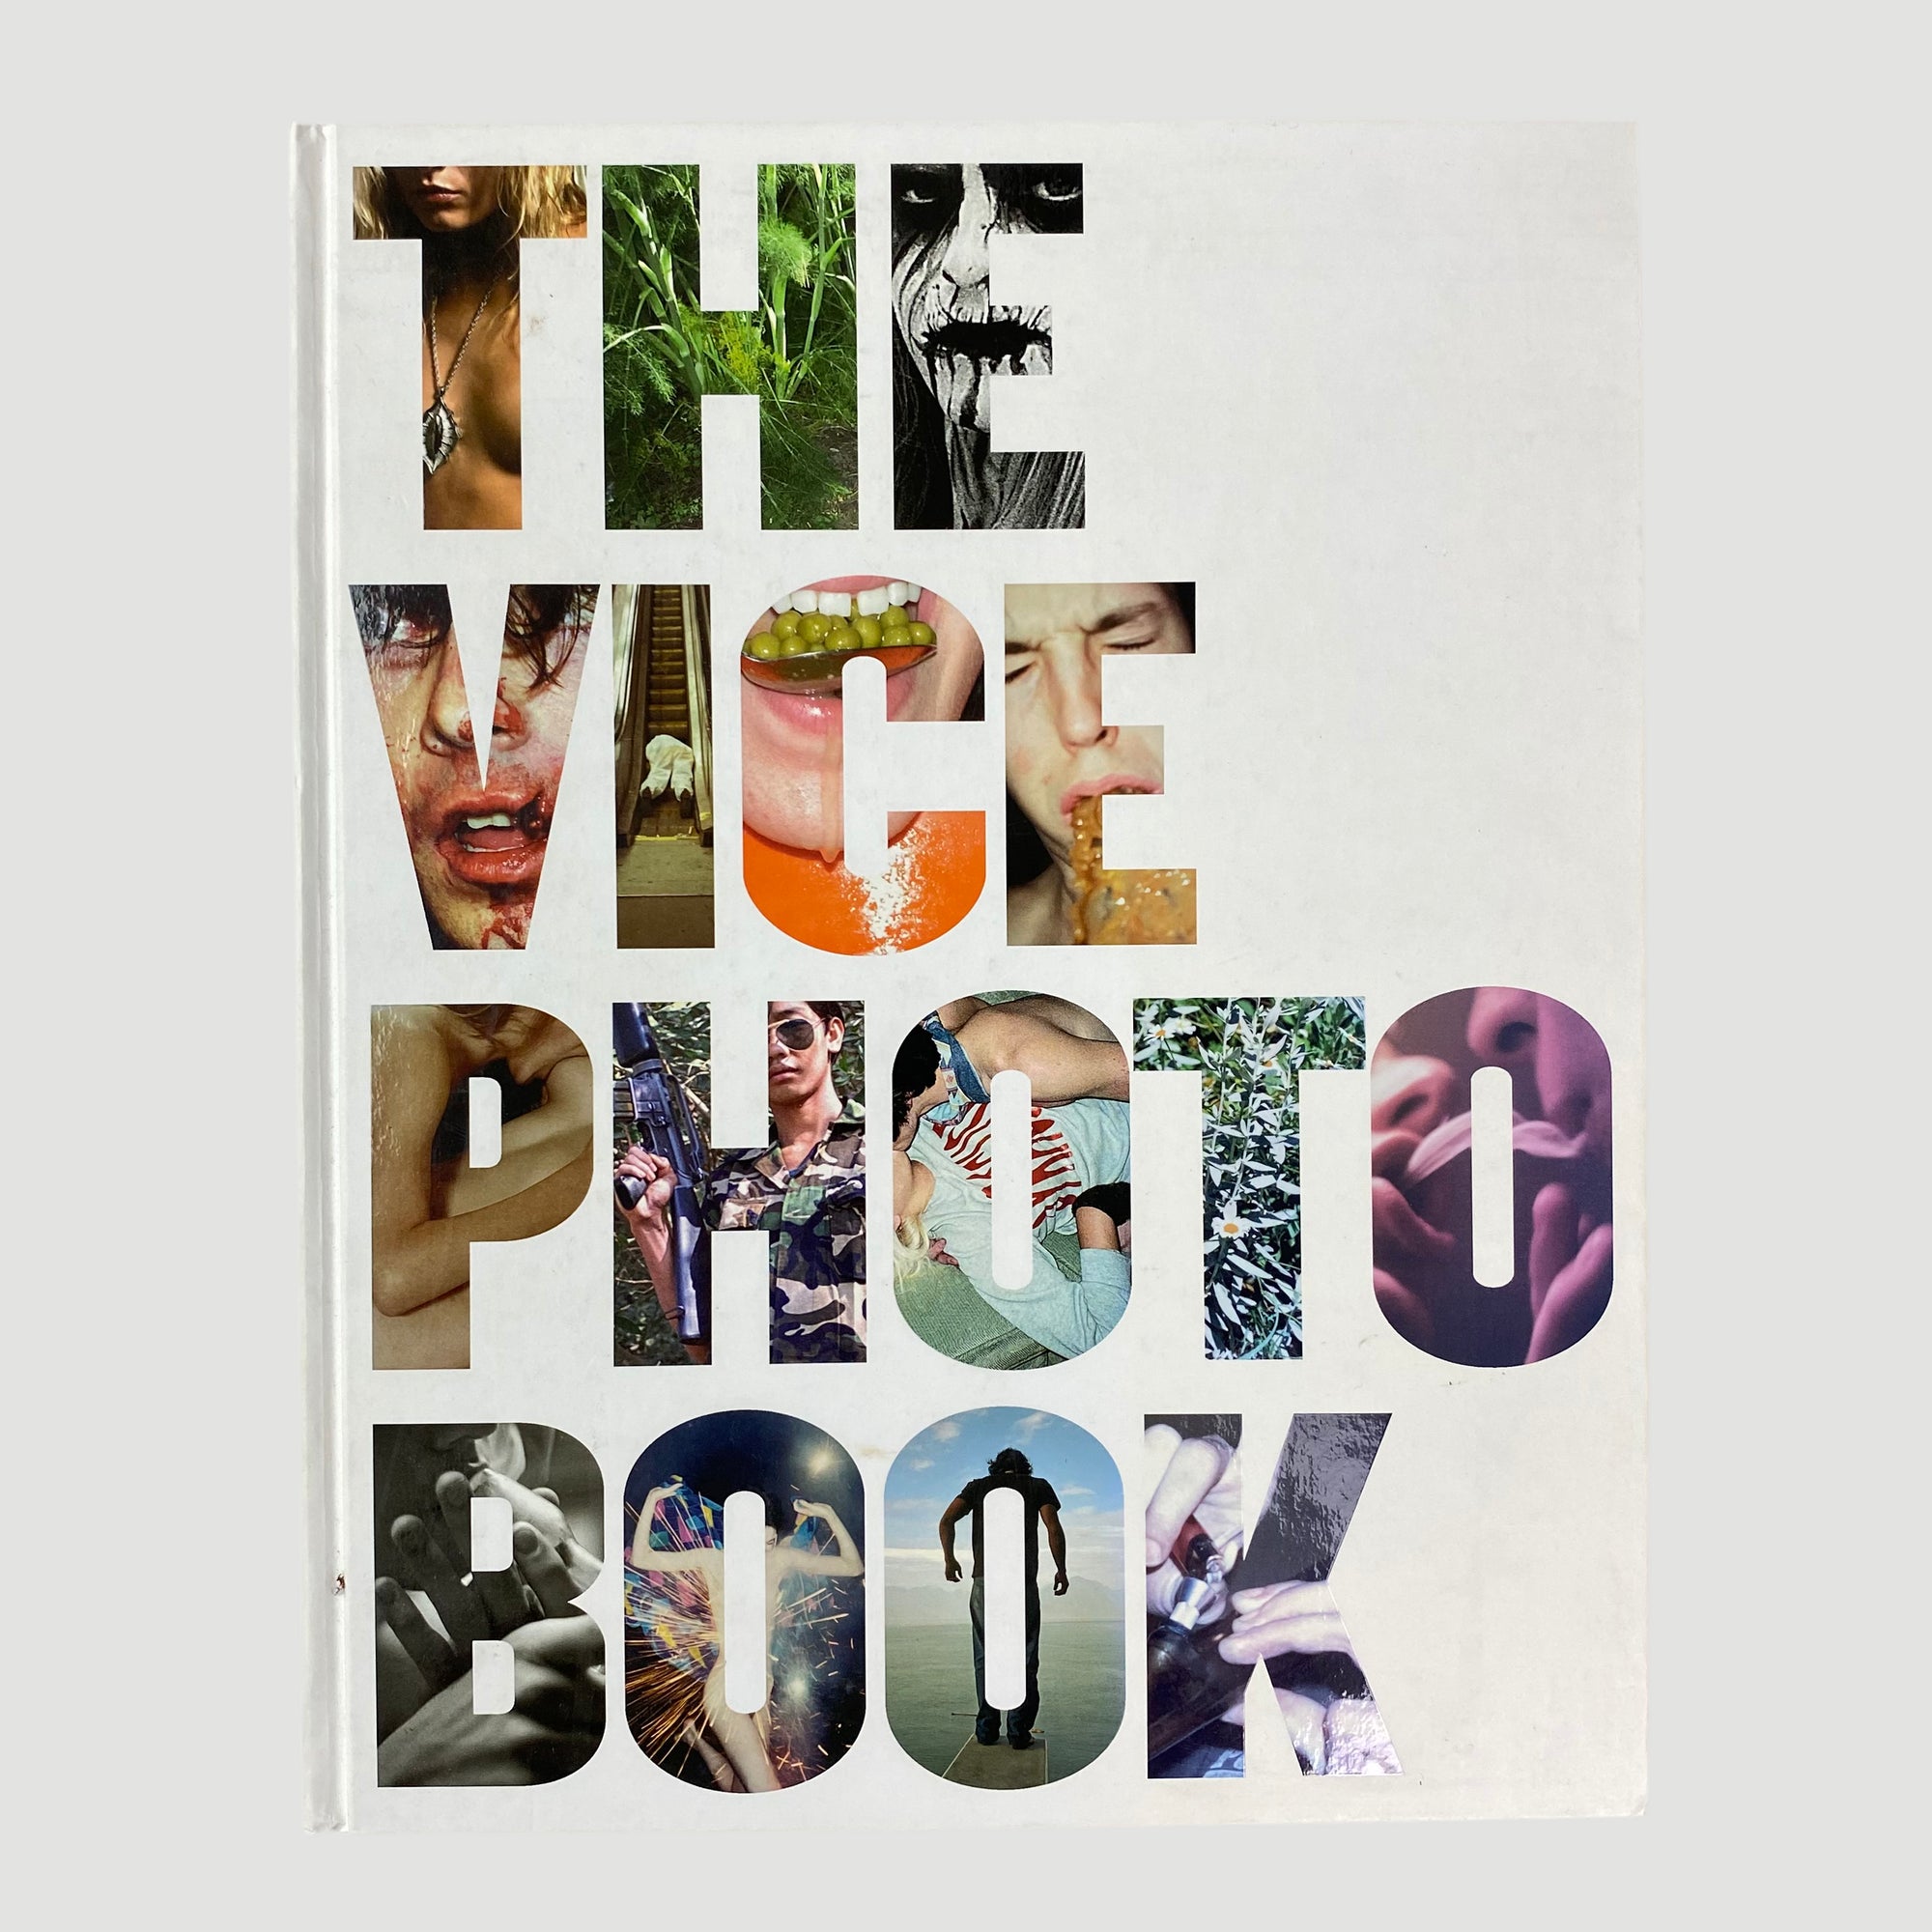 2008 VICE Photo Book 1st Edition